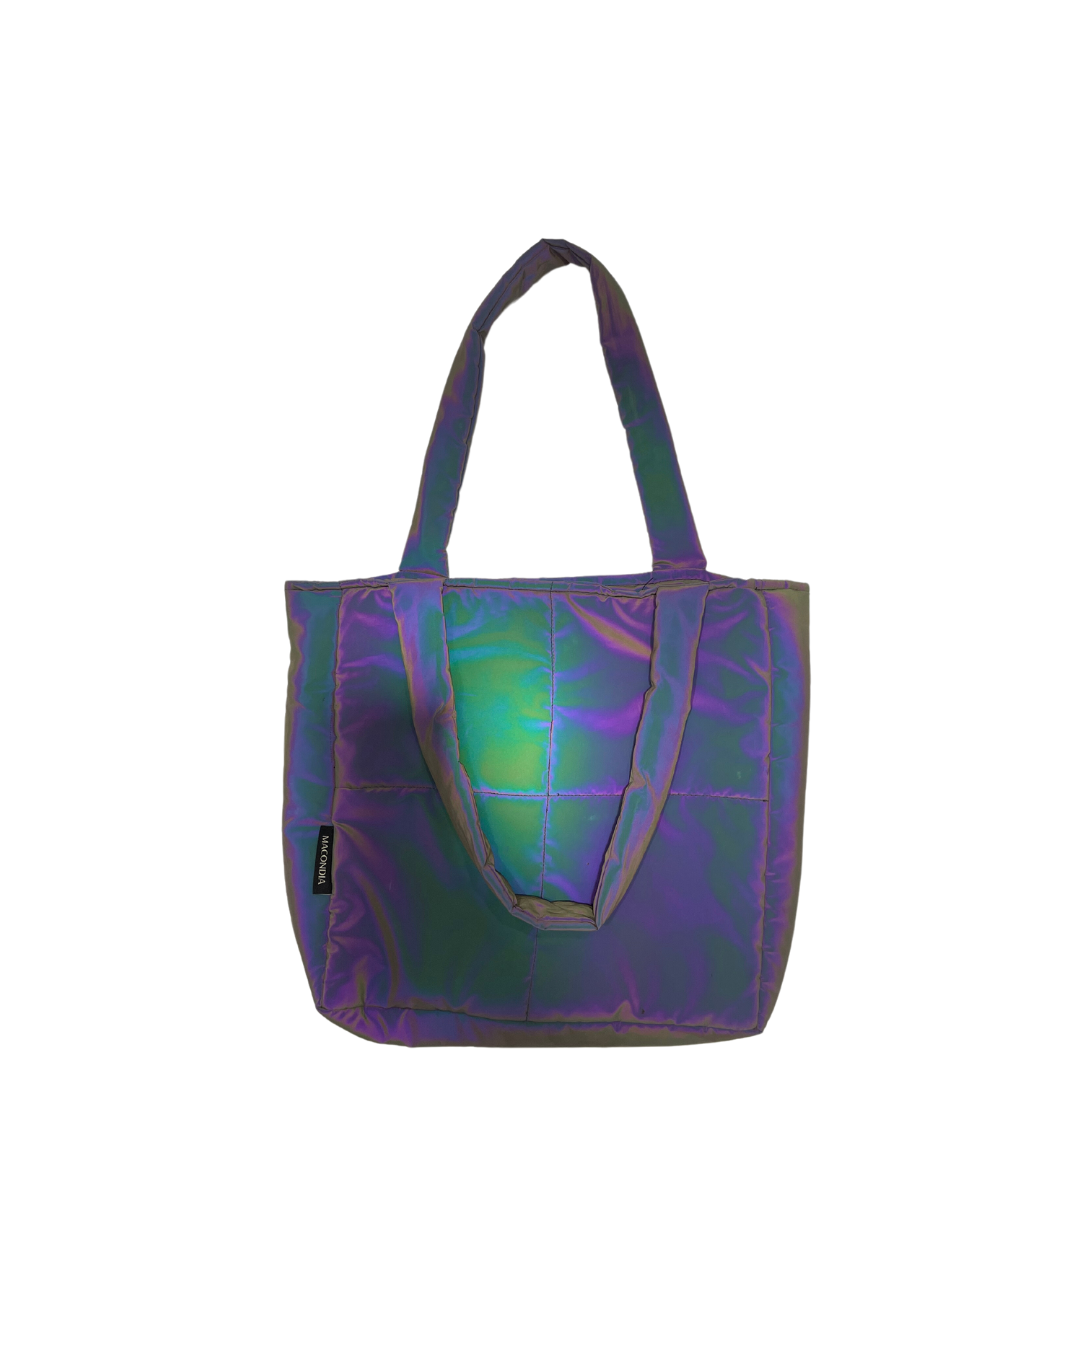 The Reflective Tote